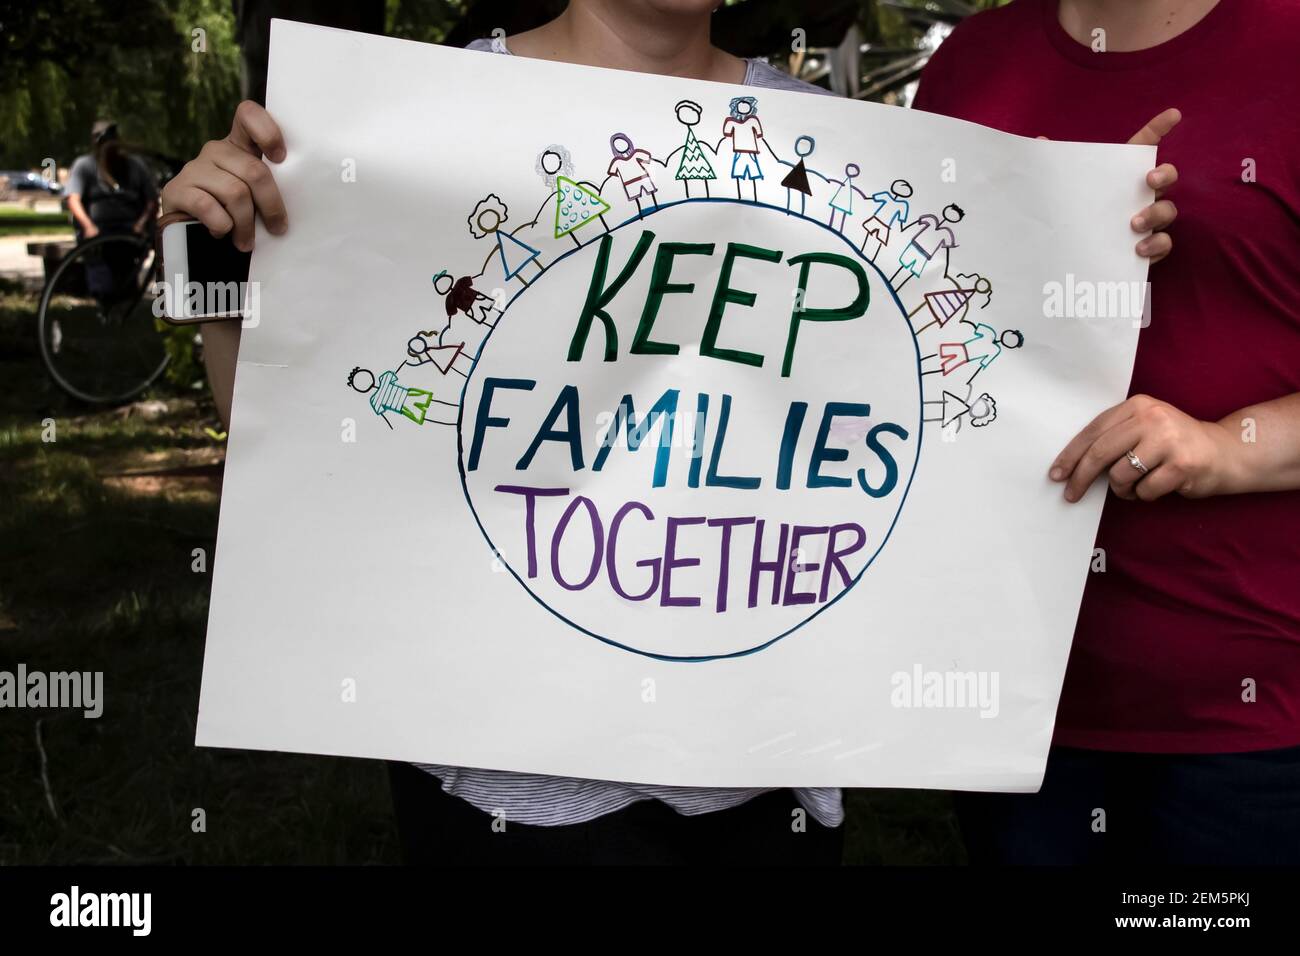 Two women at protest holding homemade sign together that says keep families together with world and families holding hands on it - cropped and selecti Stock Photo